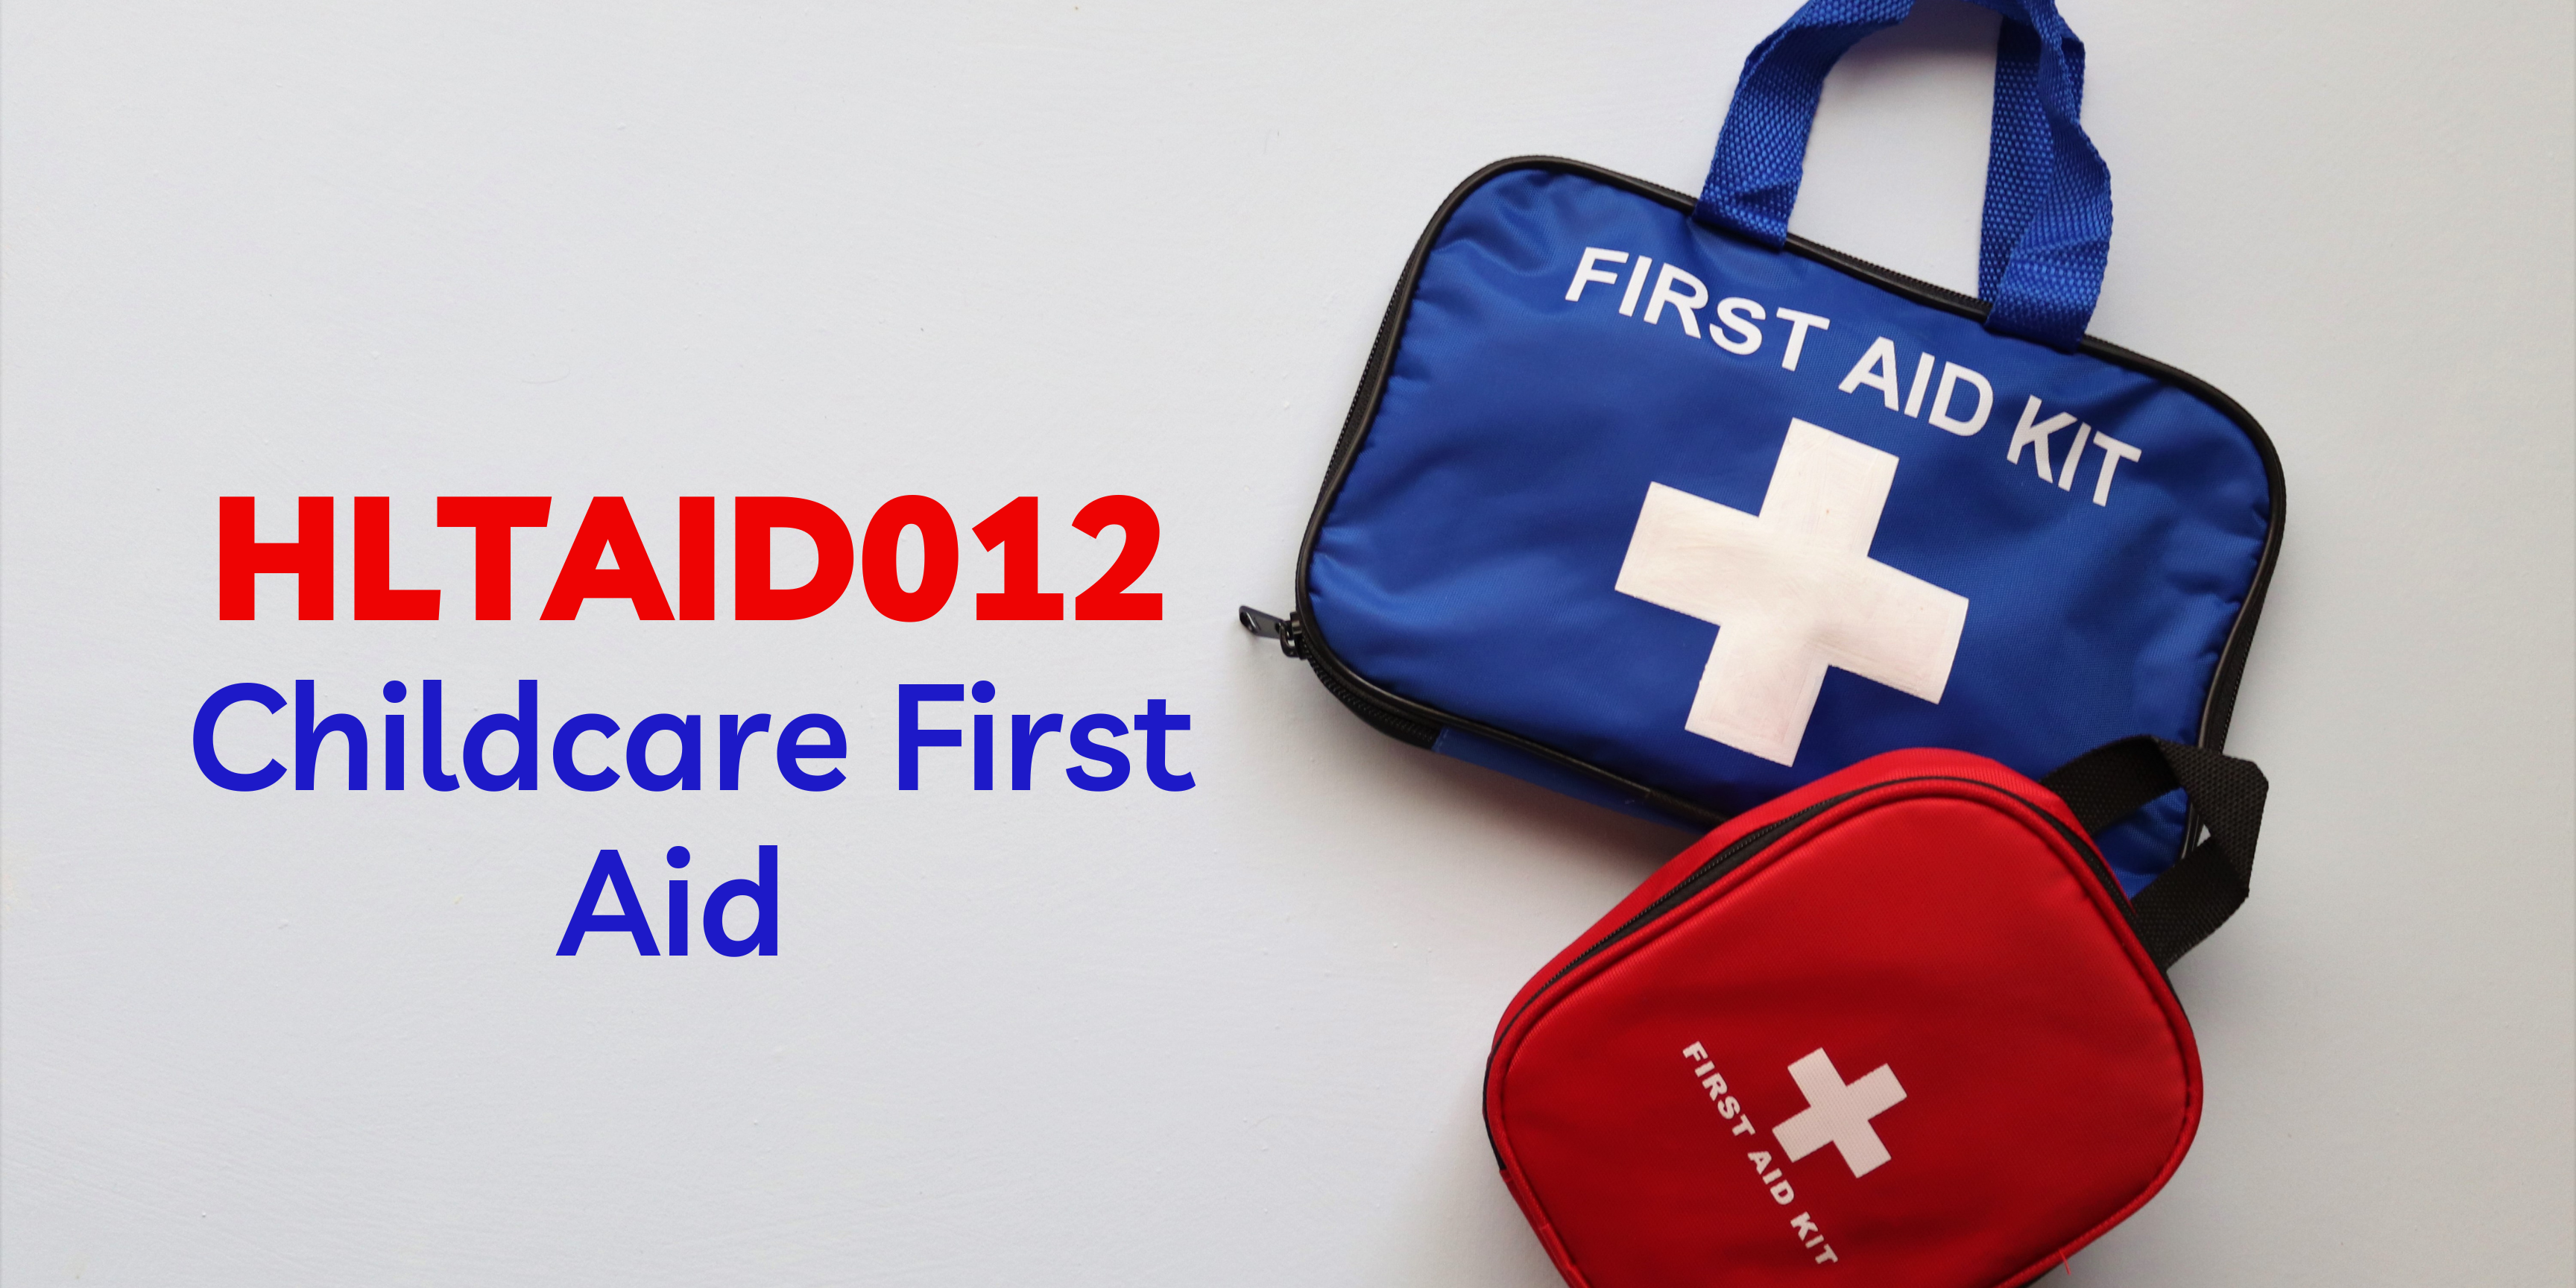 HLTAID012 - Childcare First Aid